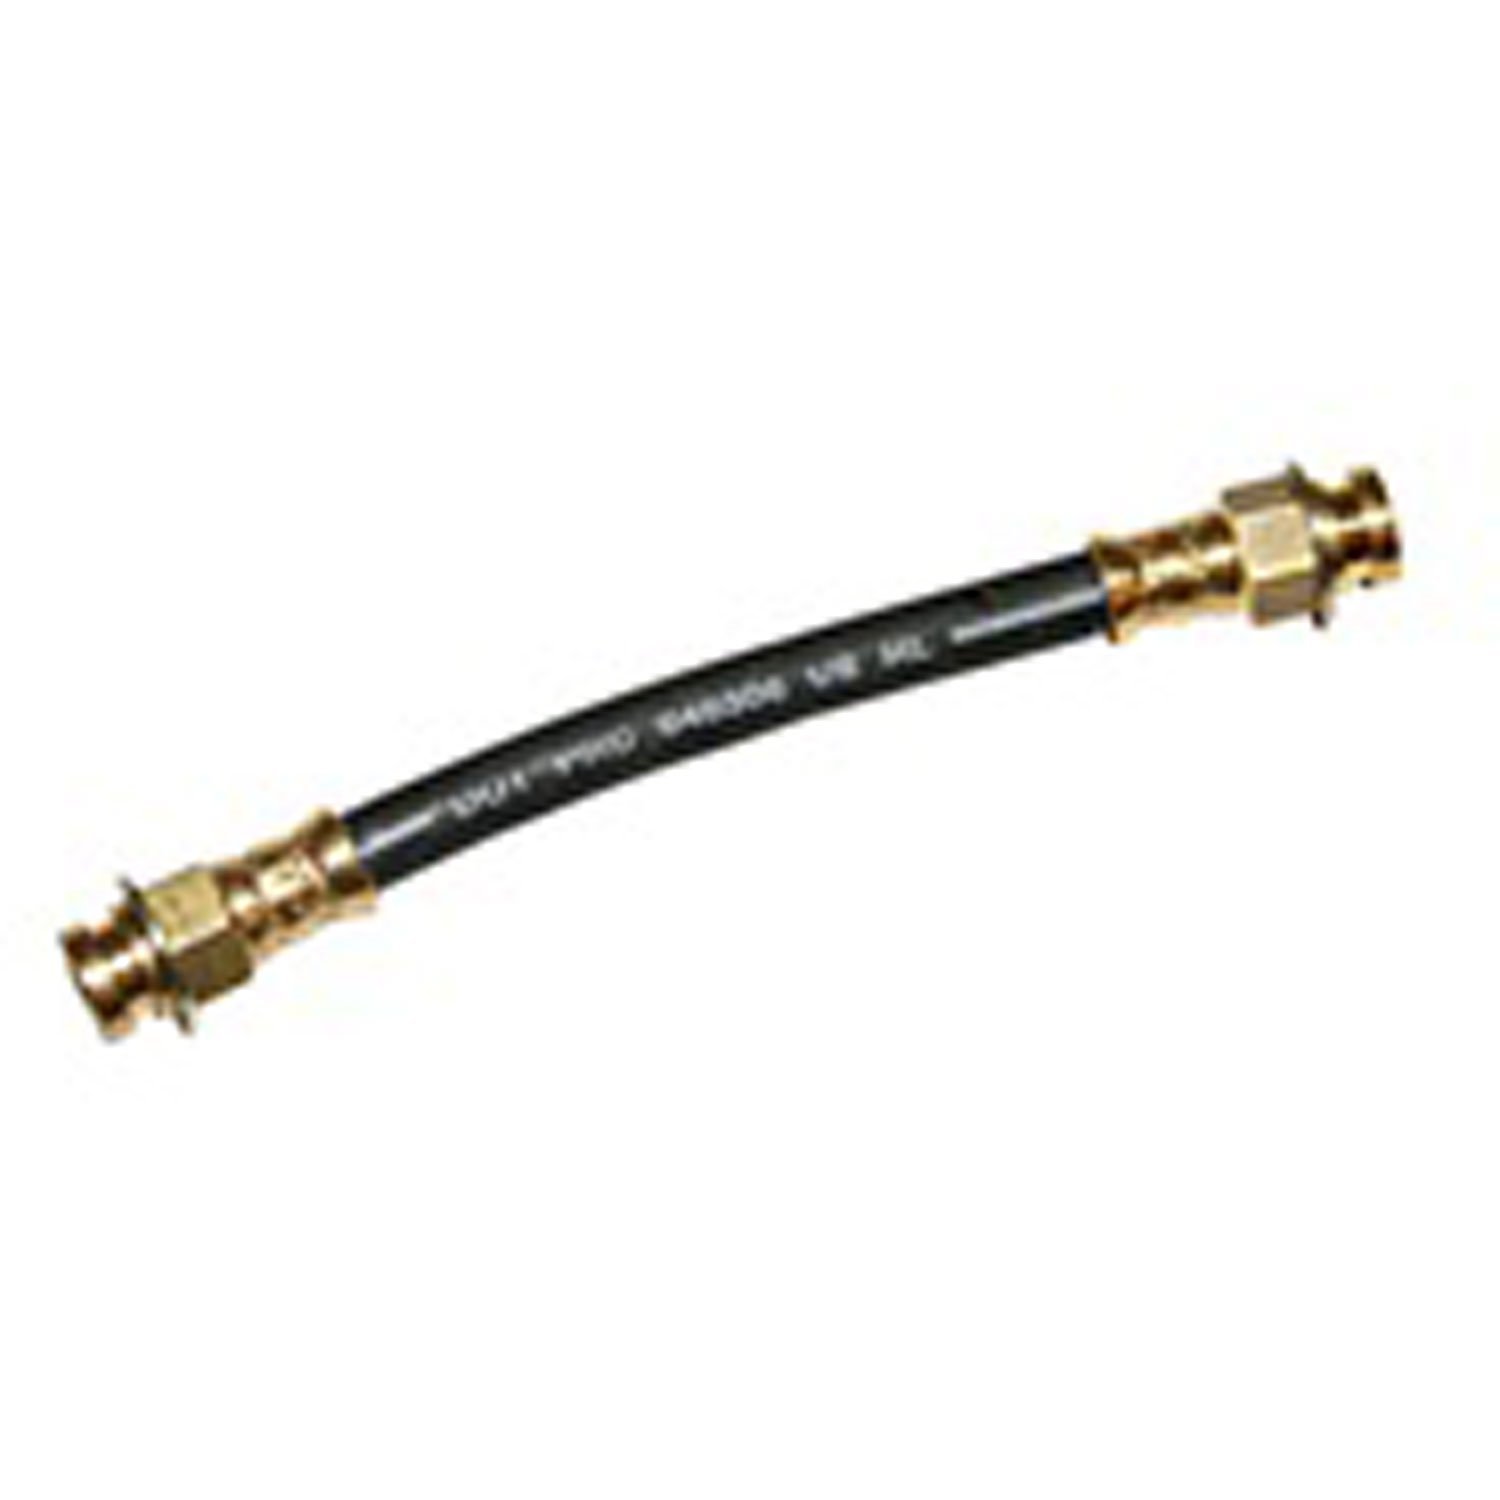 This flexible 7 inch front brake hose from Omix-ADA fits 41-45 Willys MB/Ford GPW and 46-66 Willys models.